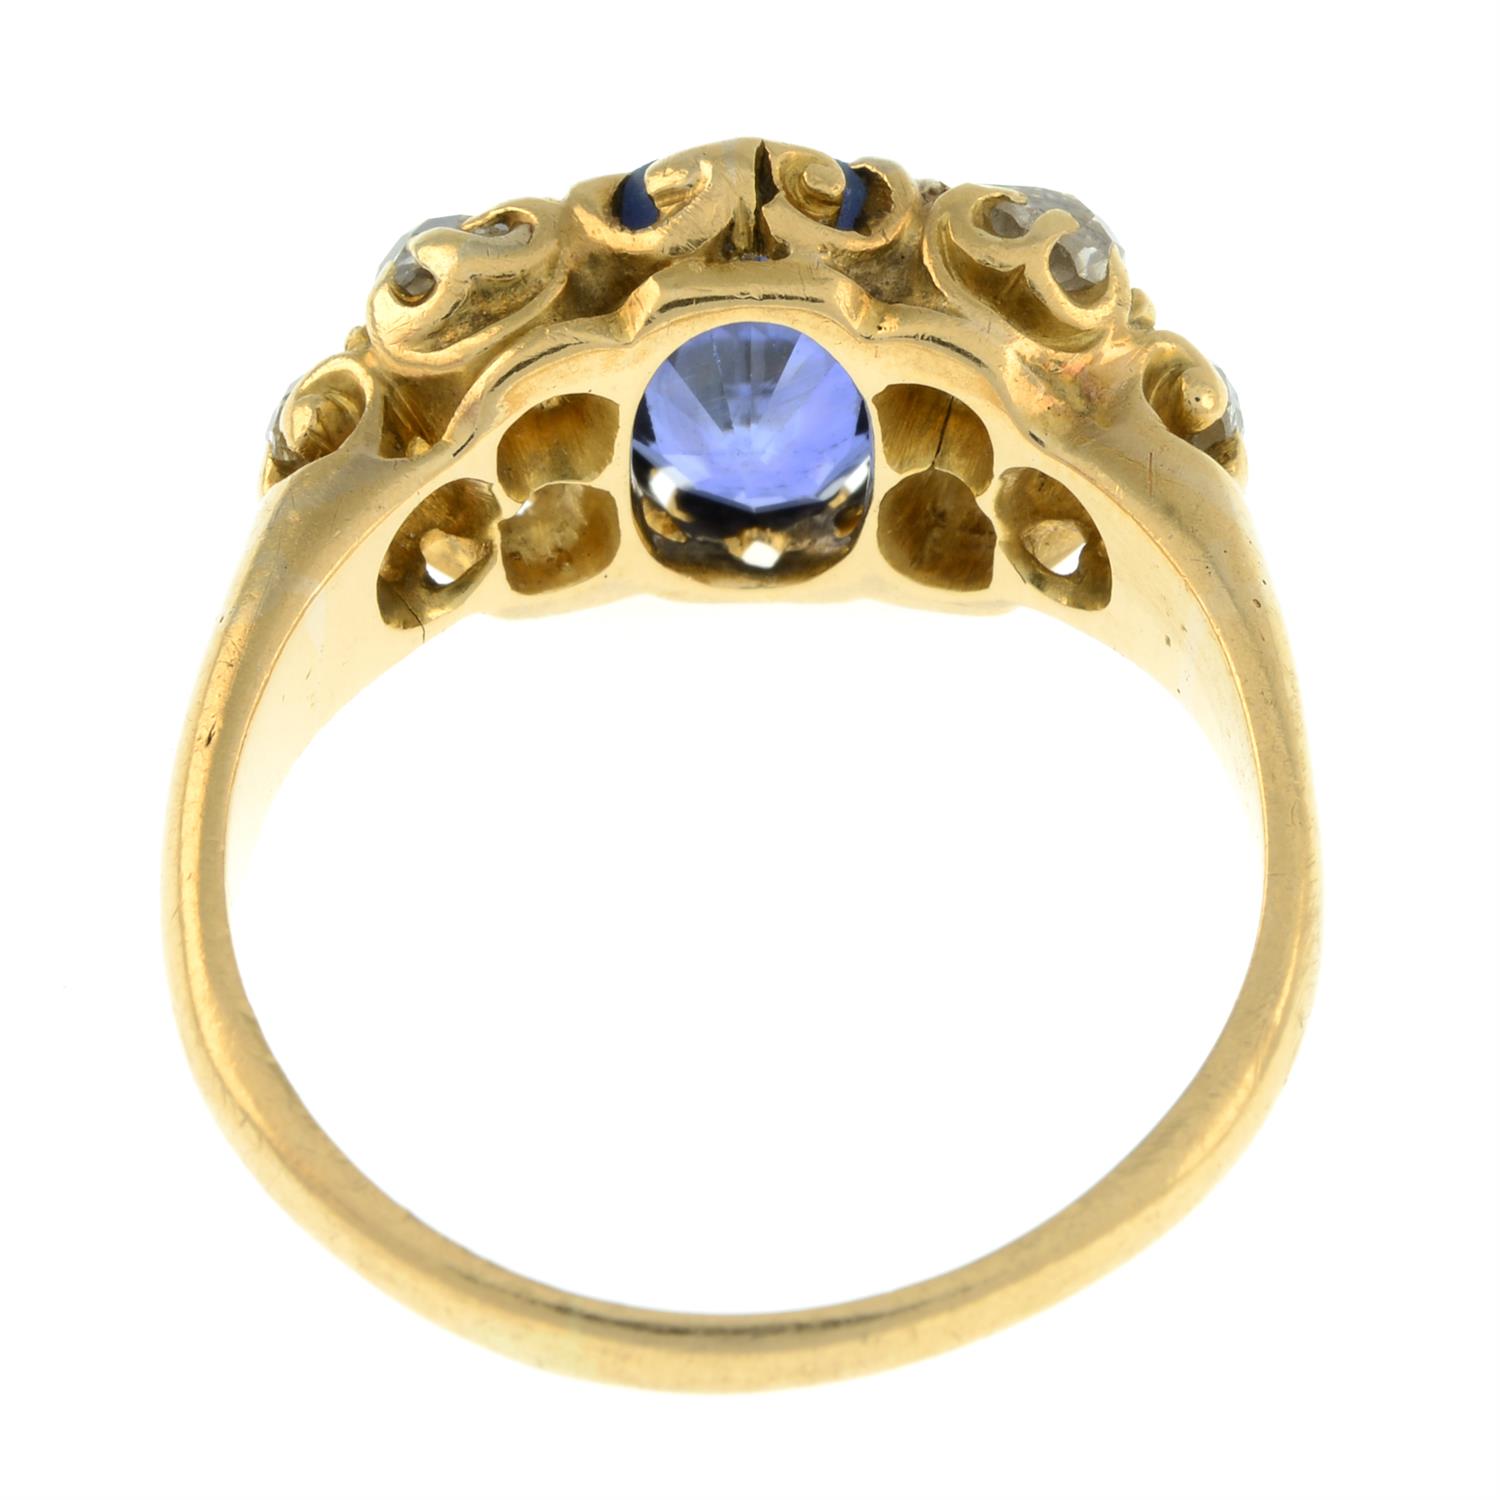 Late Victorian 18ct gold sapphire and diamond ring - Image 3 of 5